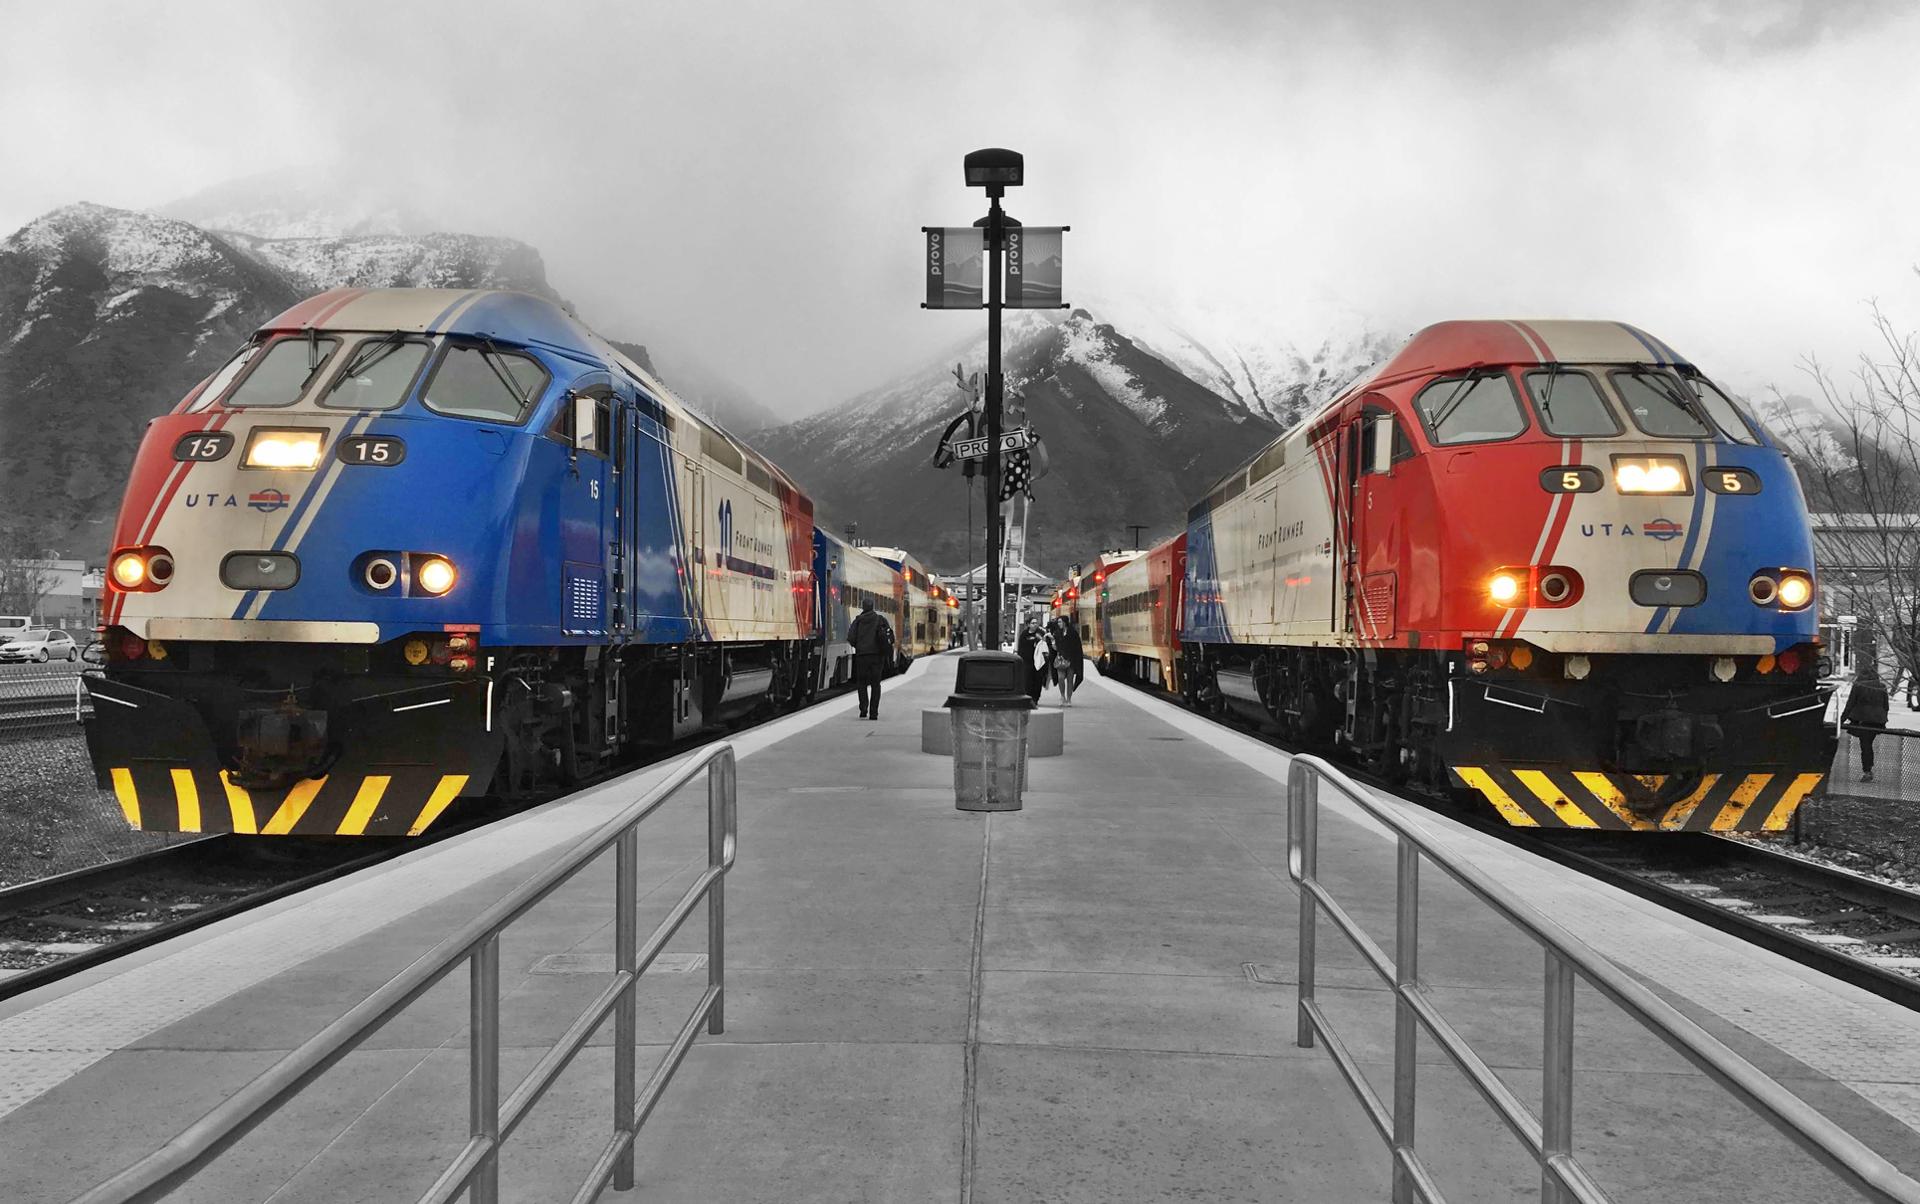 Photo of two UTA FrontRunner trains at the Provo, Utah station.